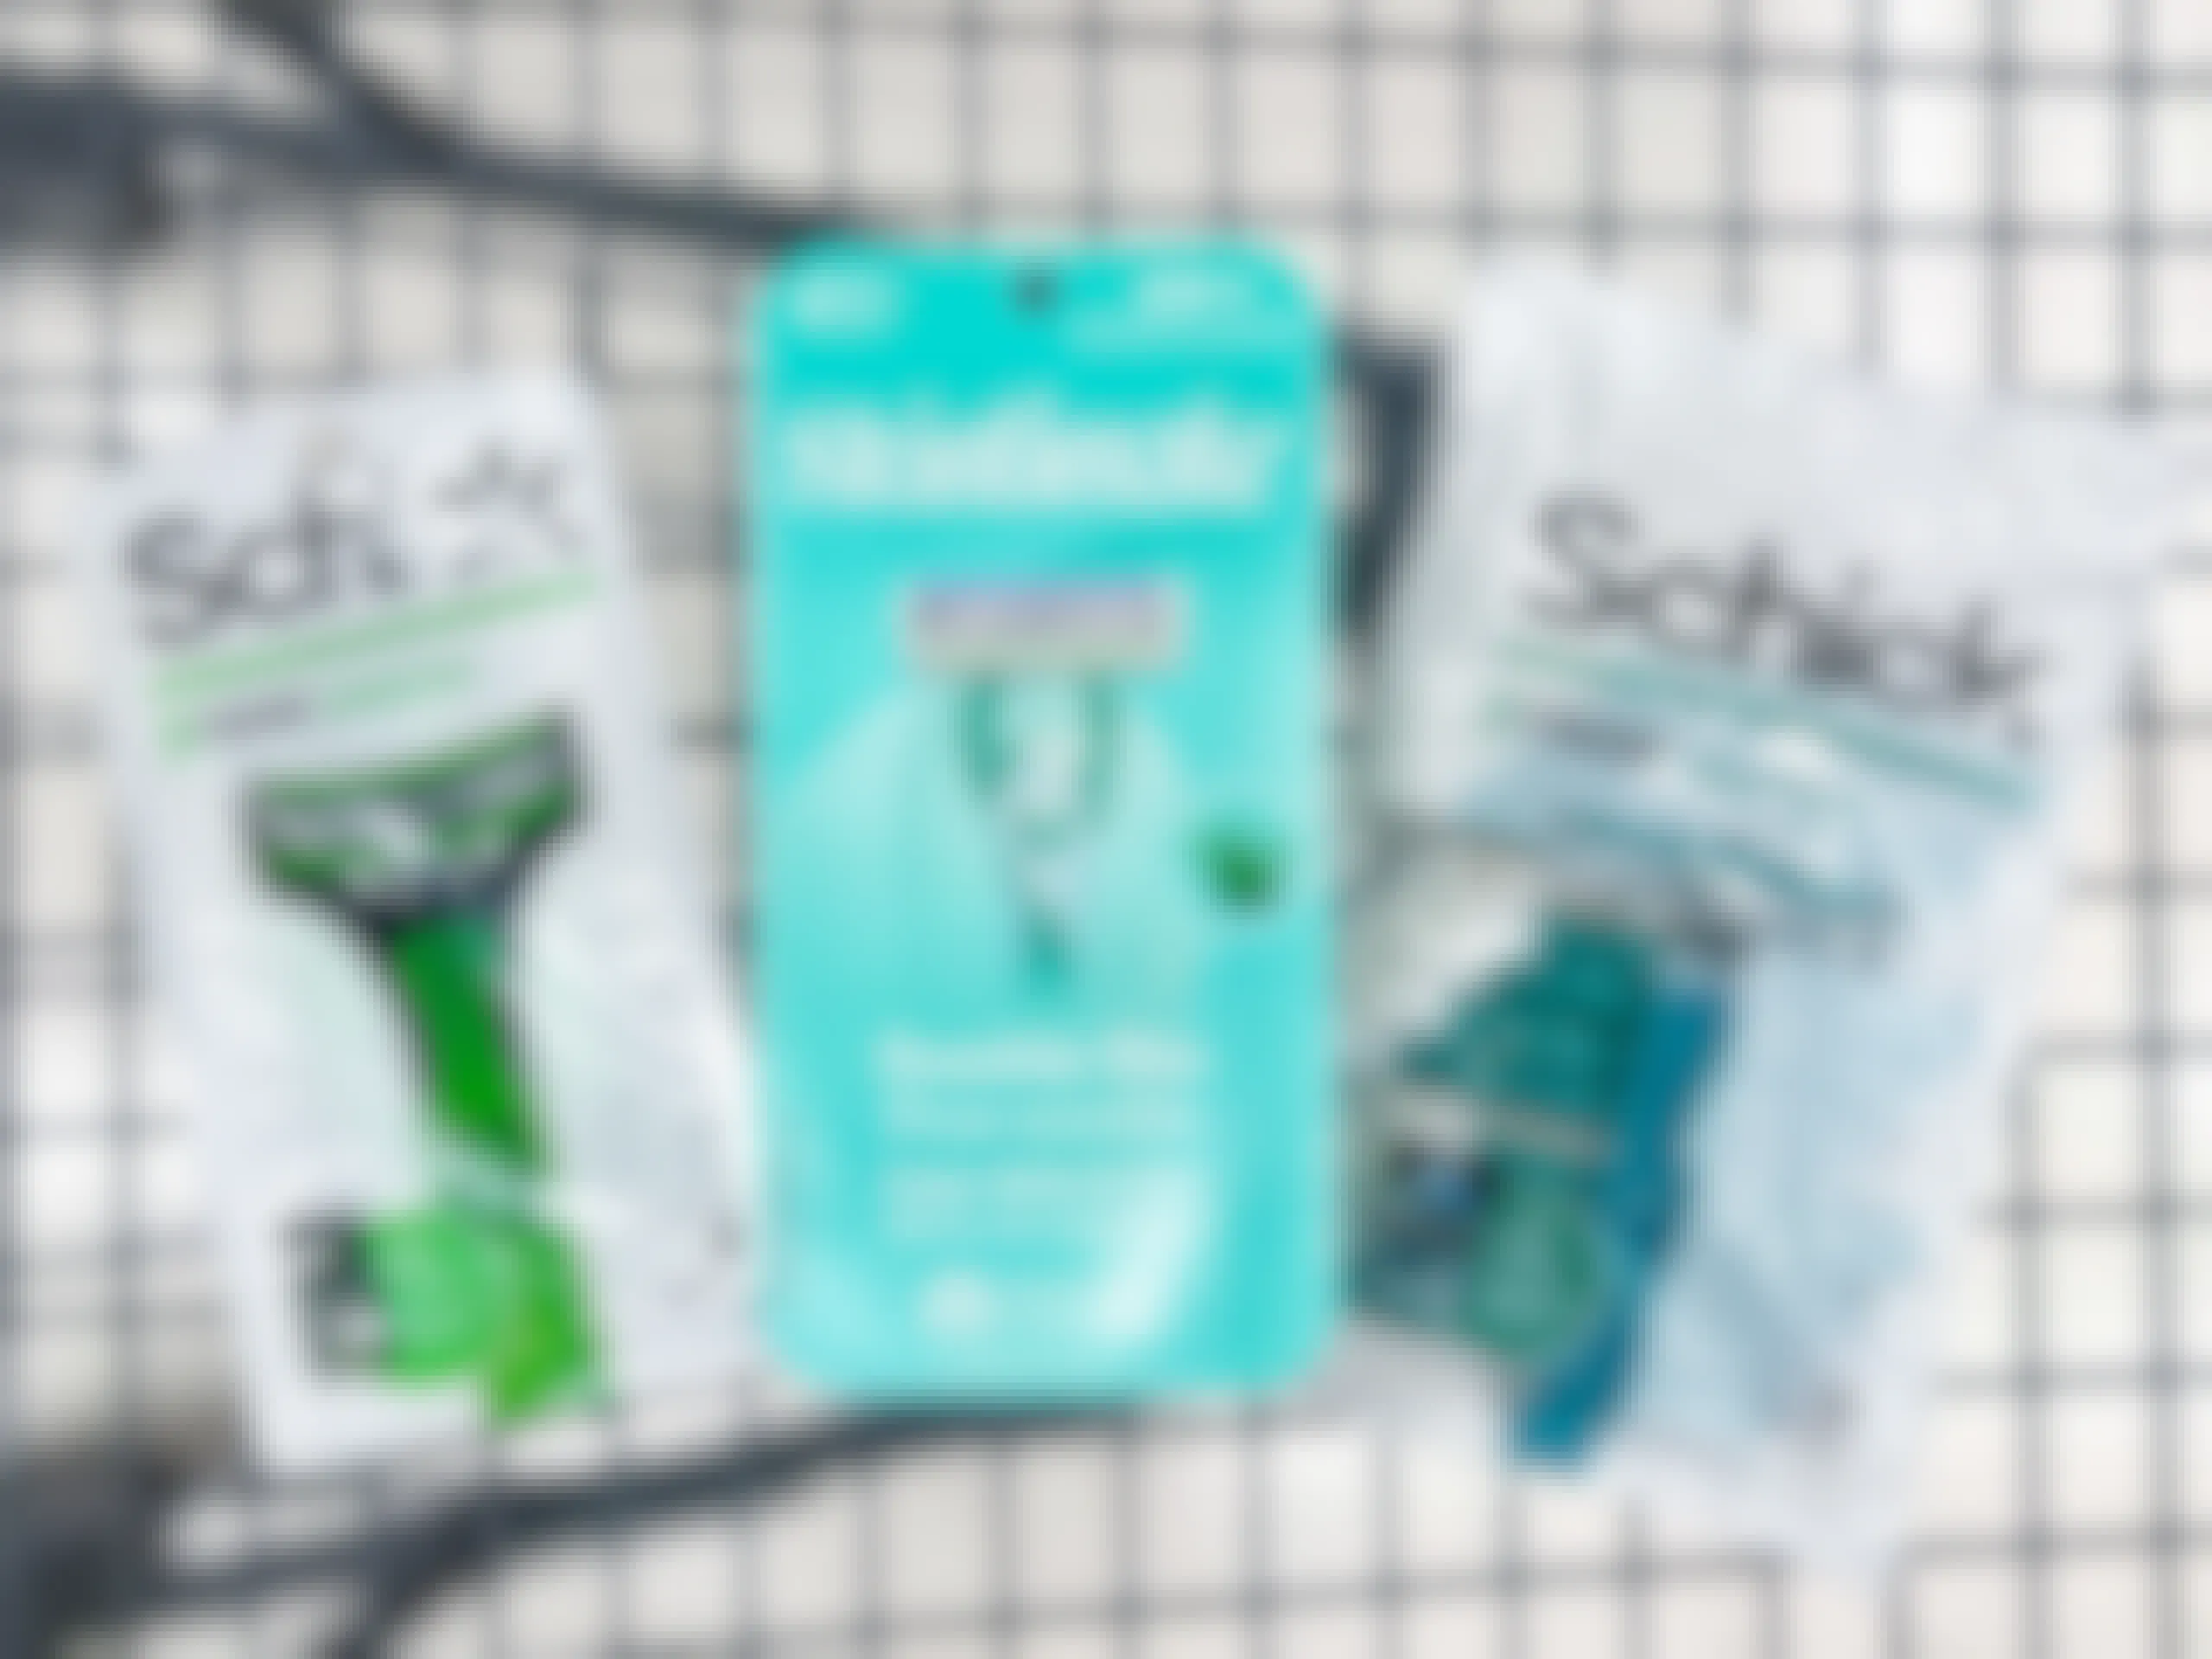 schick, skintimate, and schick disposable razors in shopping cart